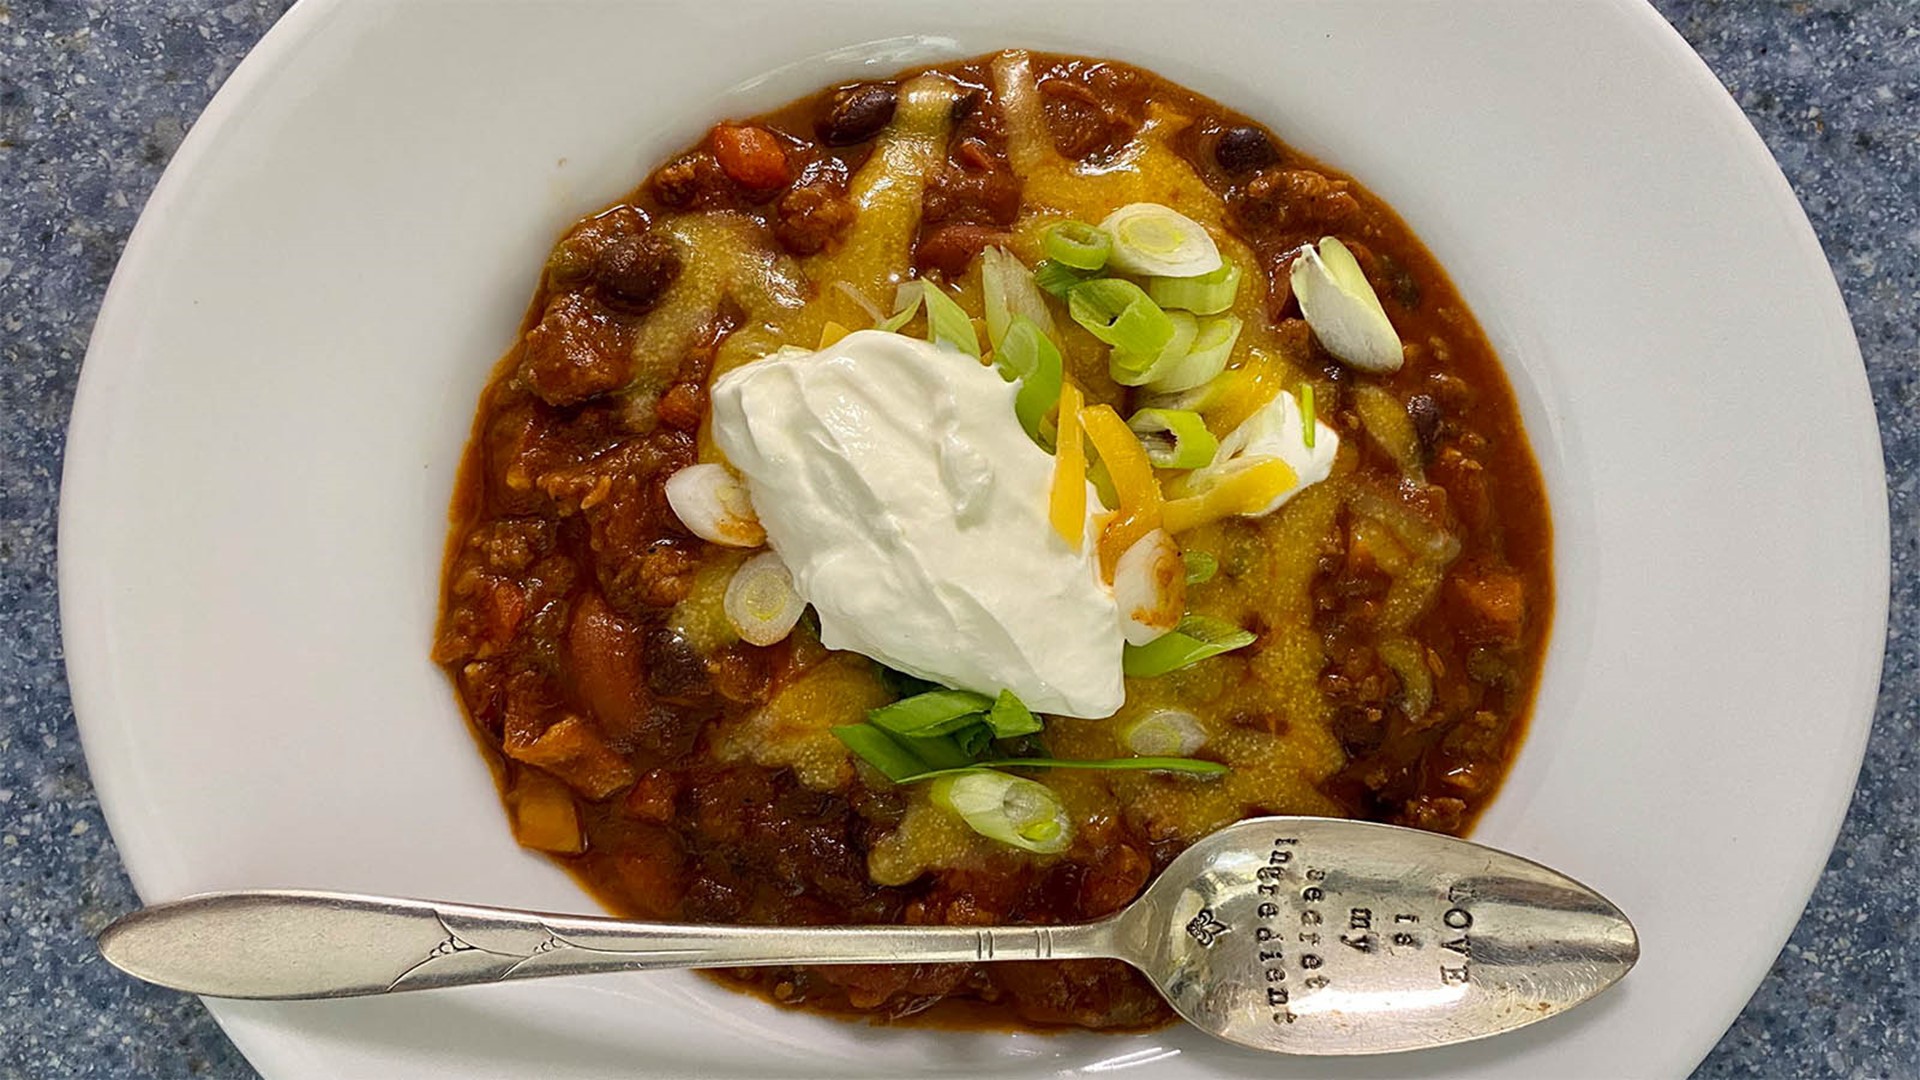 In honor of National IPA Beer Day, chef whipped up a bowl of Beer Chili.